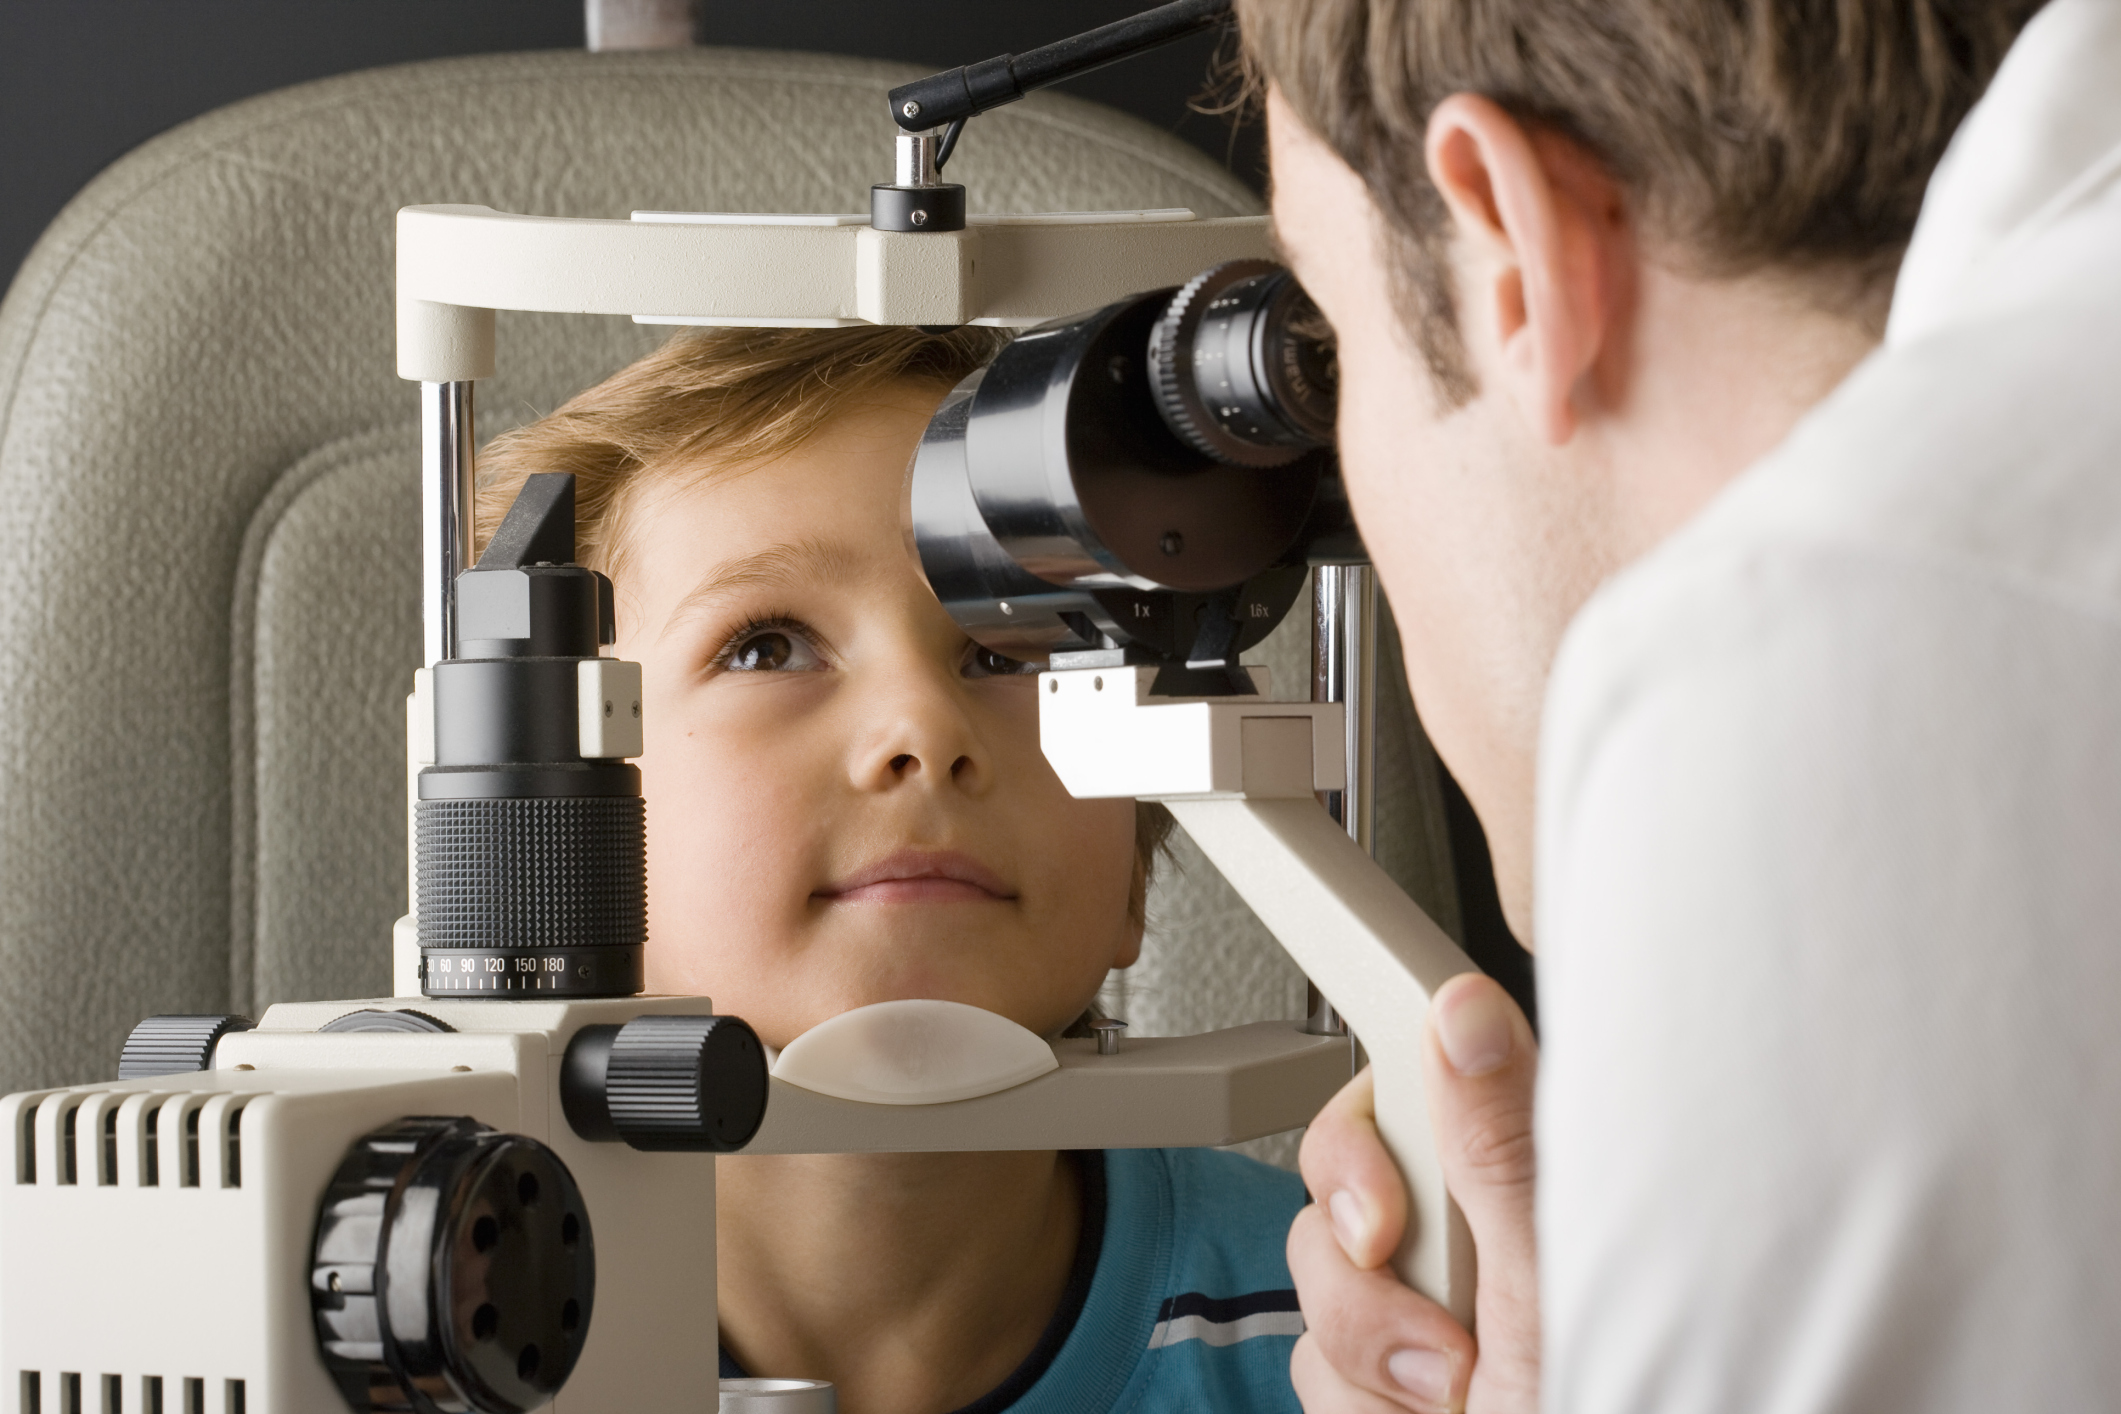 Report: Technology may be harming kids’ eyes